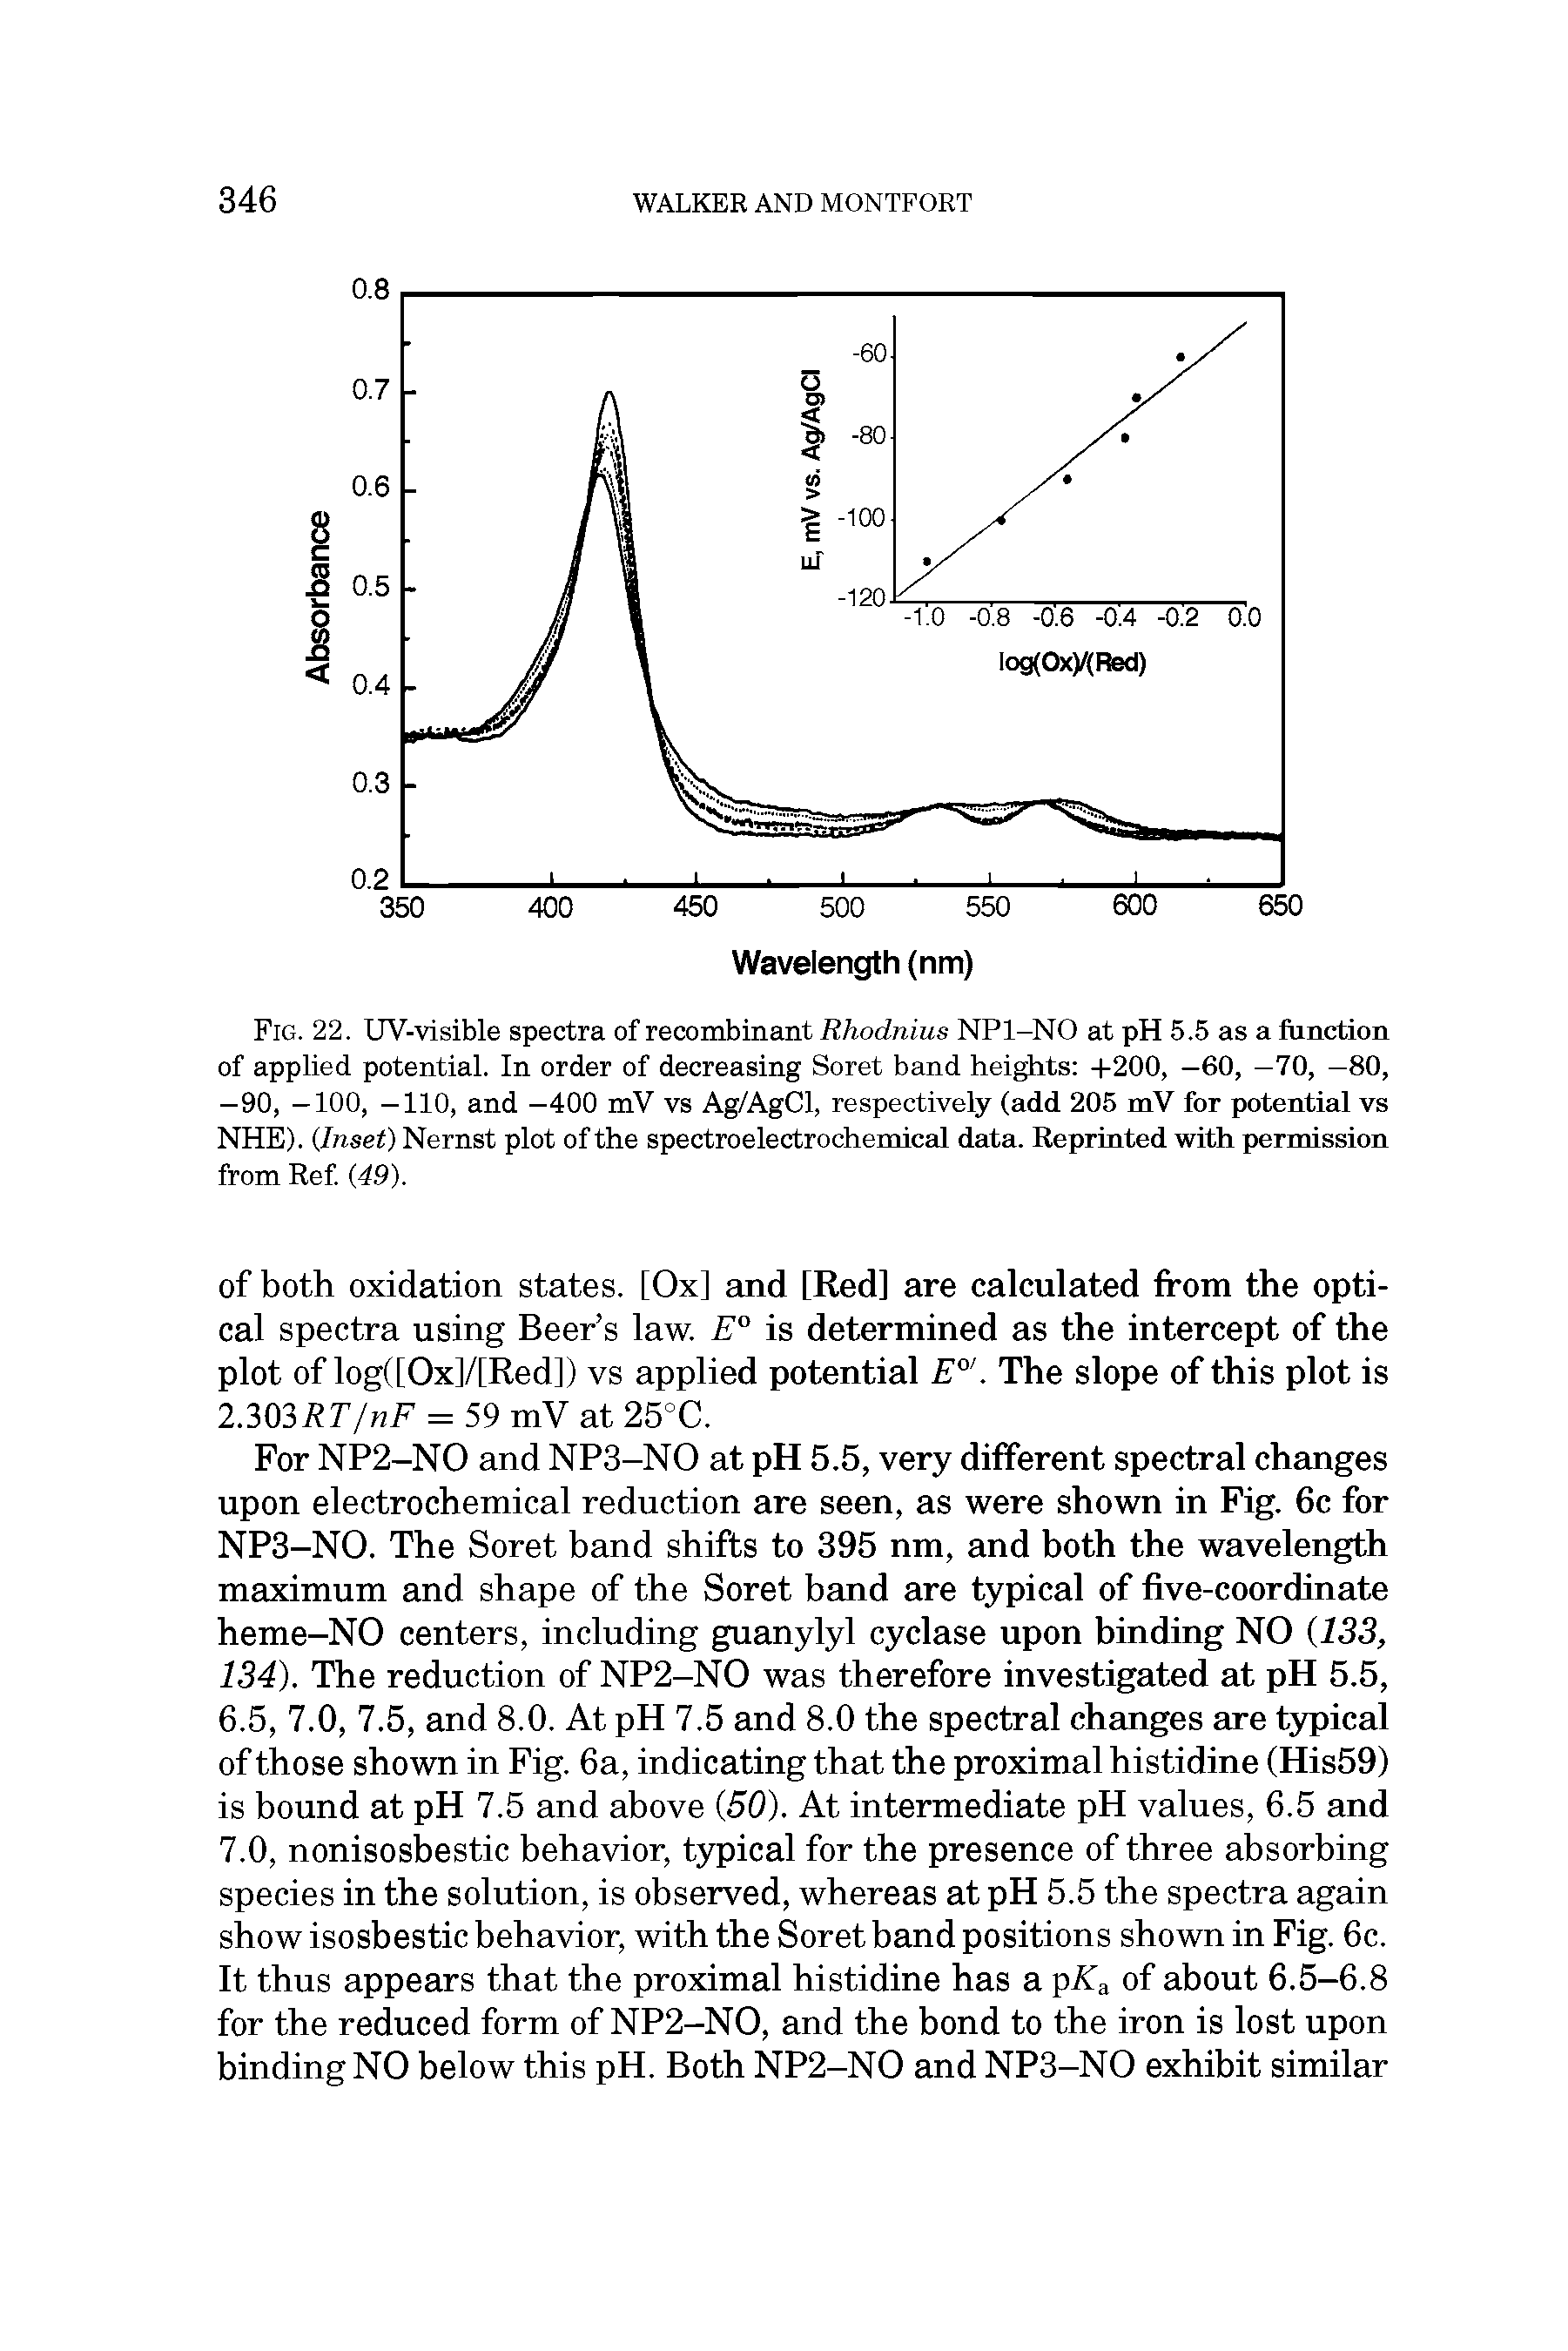 Fig. 22. UV-visible spectra of recombinant Rhodnius NPl-NO at pH 5.5 as a function of applied potential. In order of decreasing Soret band heights +200, —60, —70, —80, —90, —100, —110, and —400 mV vs Ag/AgCl, respectively (add 205 mV for potential vs NHE). Inset) Nernst plot of the spectroelectrochemicEil data. Reprinted with permission from Ref 49).